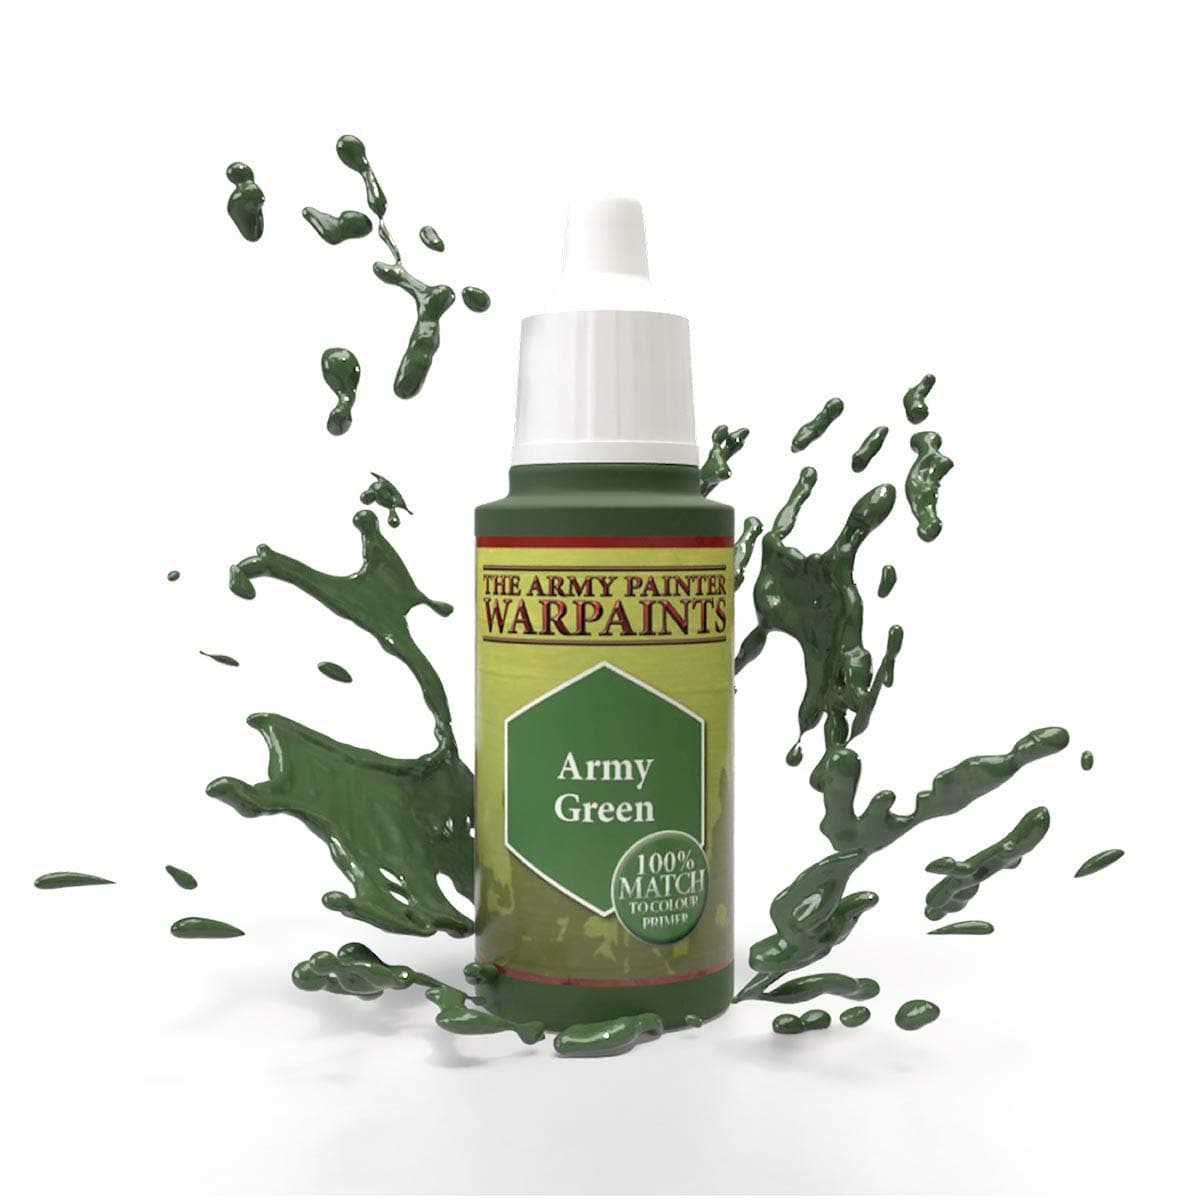 The Army Painter Warpaints: Army Green 18ml - Lost City Toys